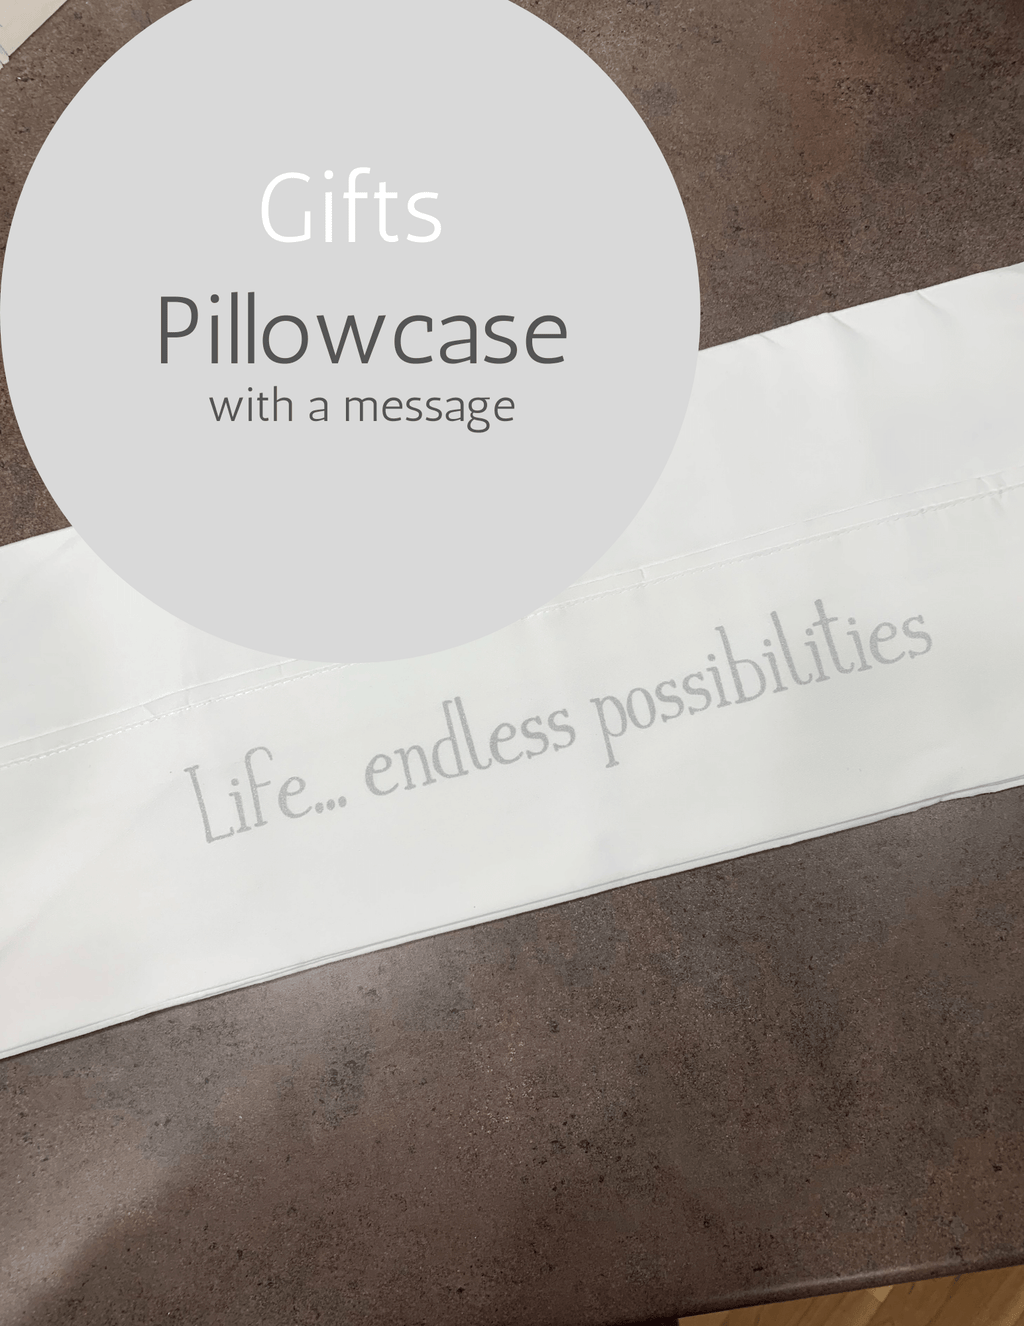 Life...endless possibilities - Pillowcase with a Message